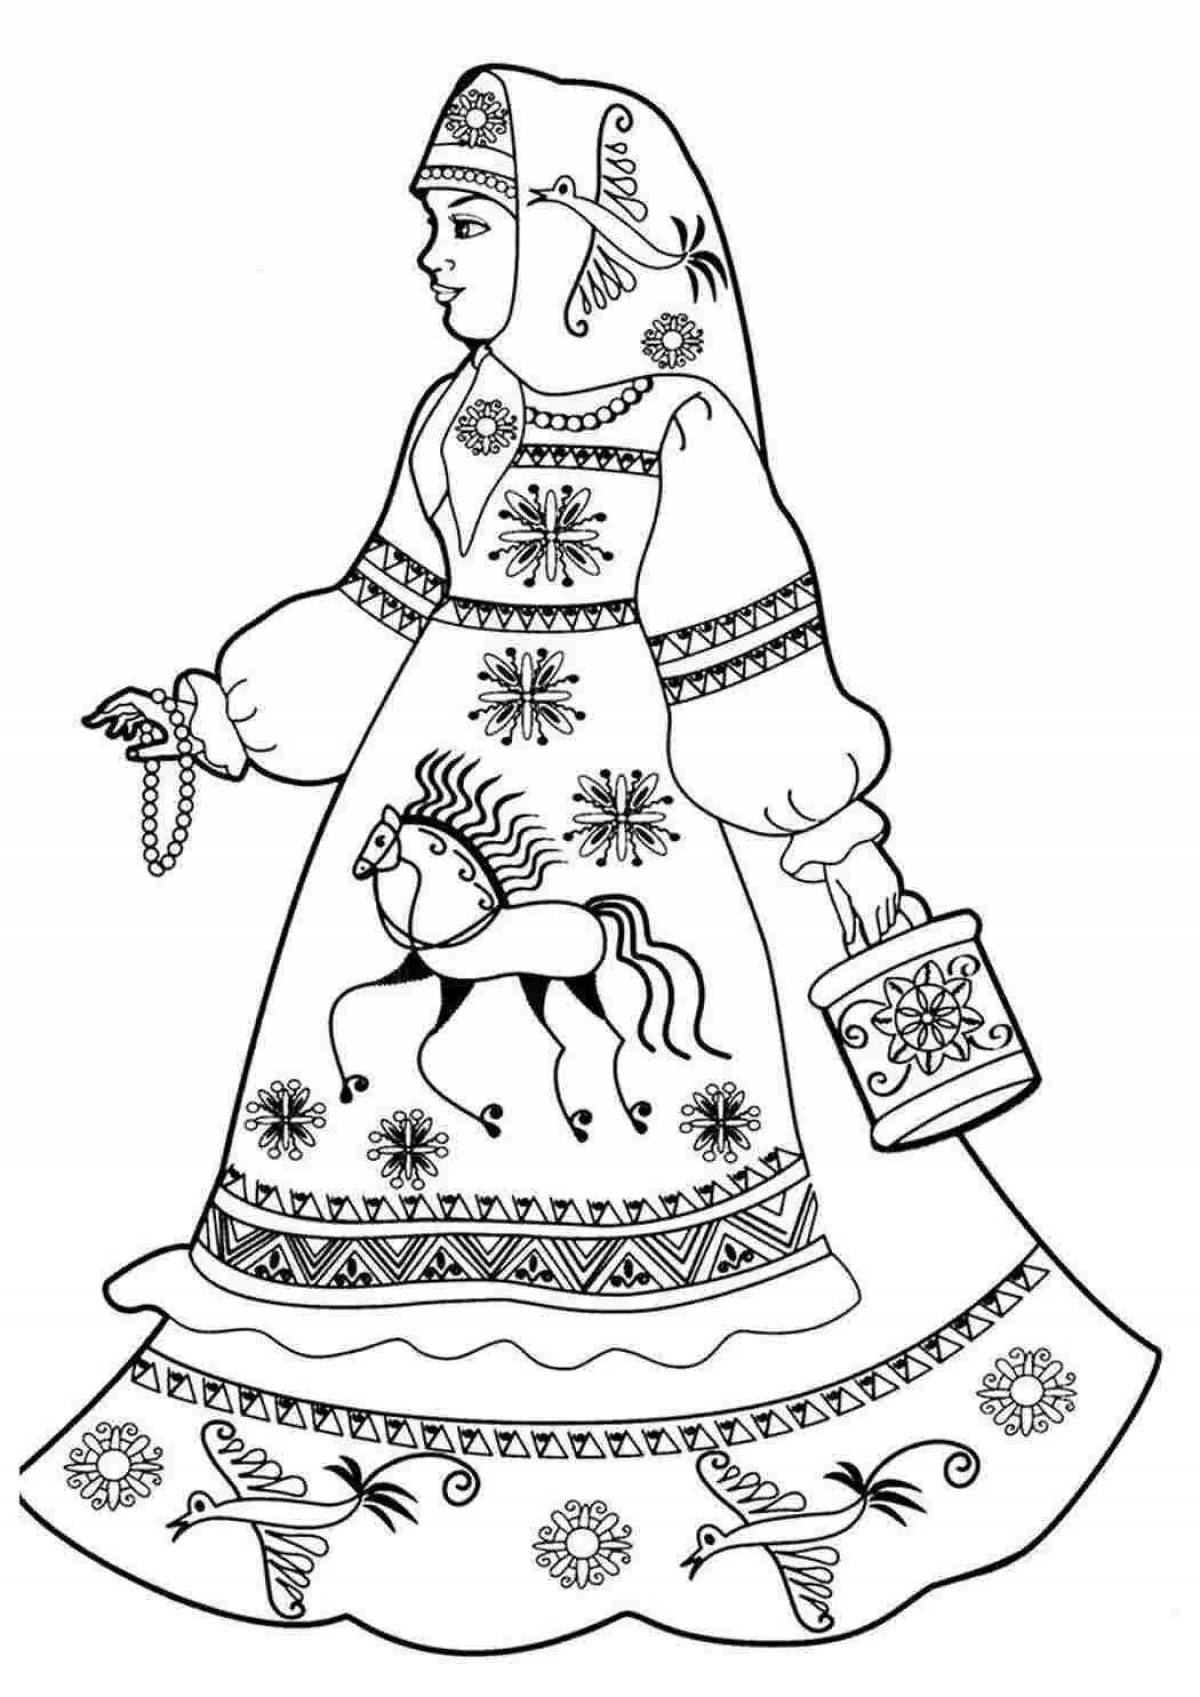 Dreamy Russian national coloring book